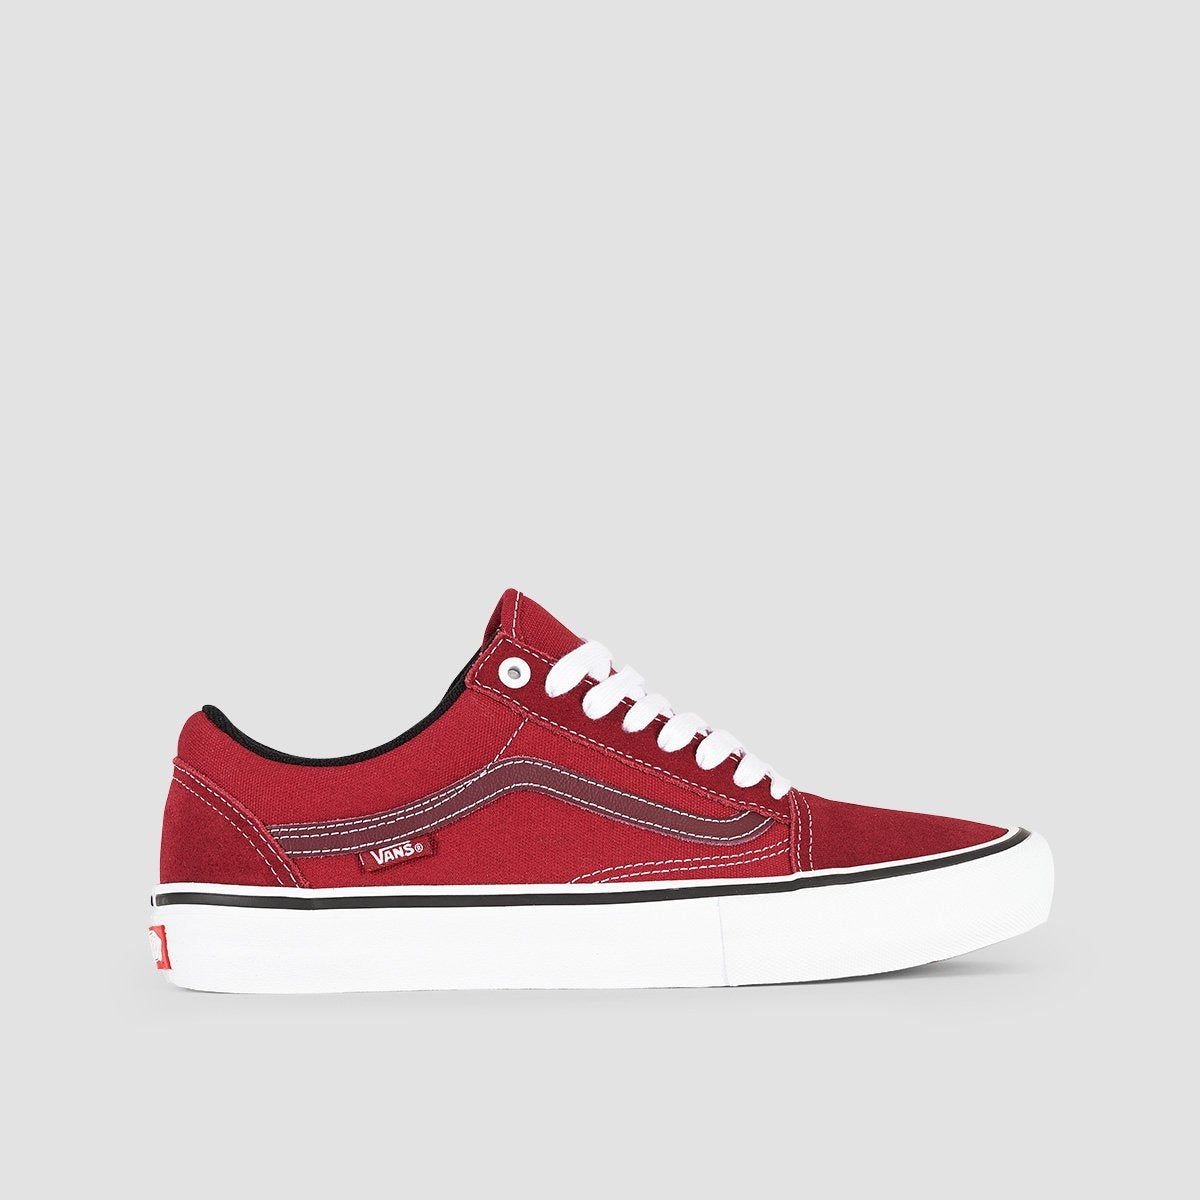 red and white low top vans